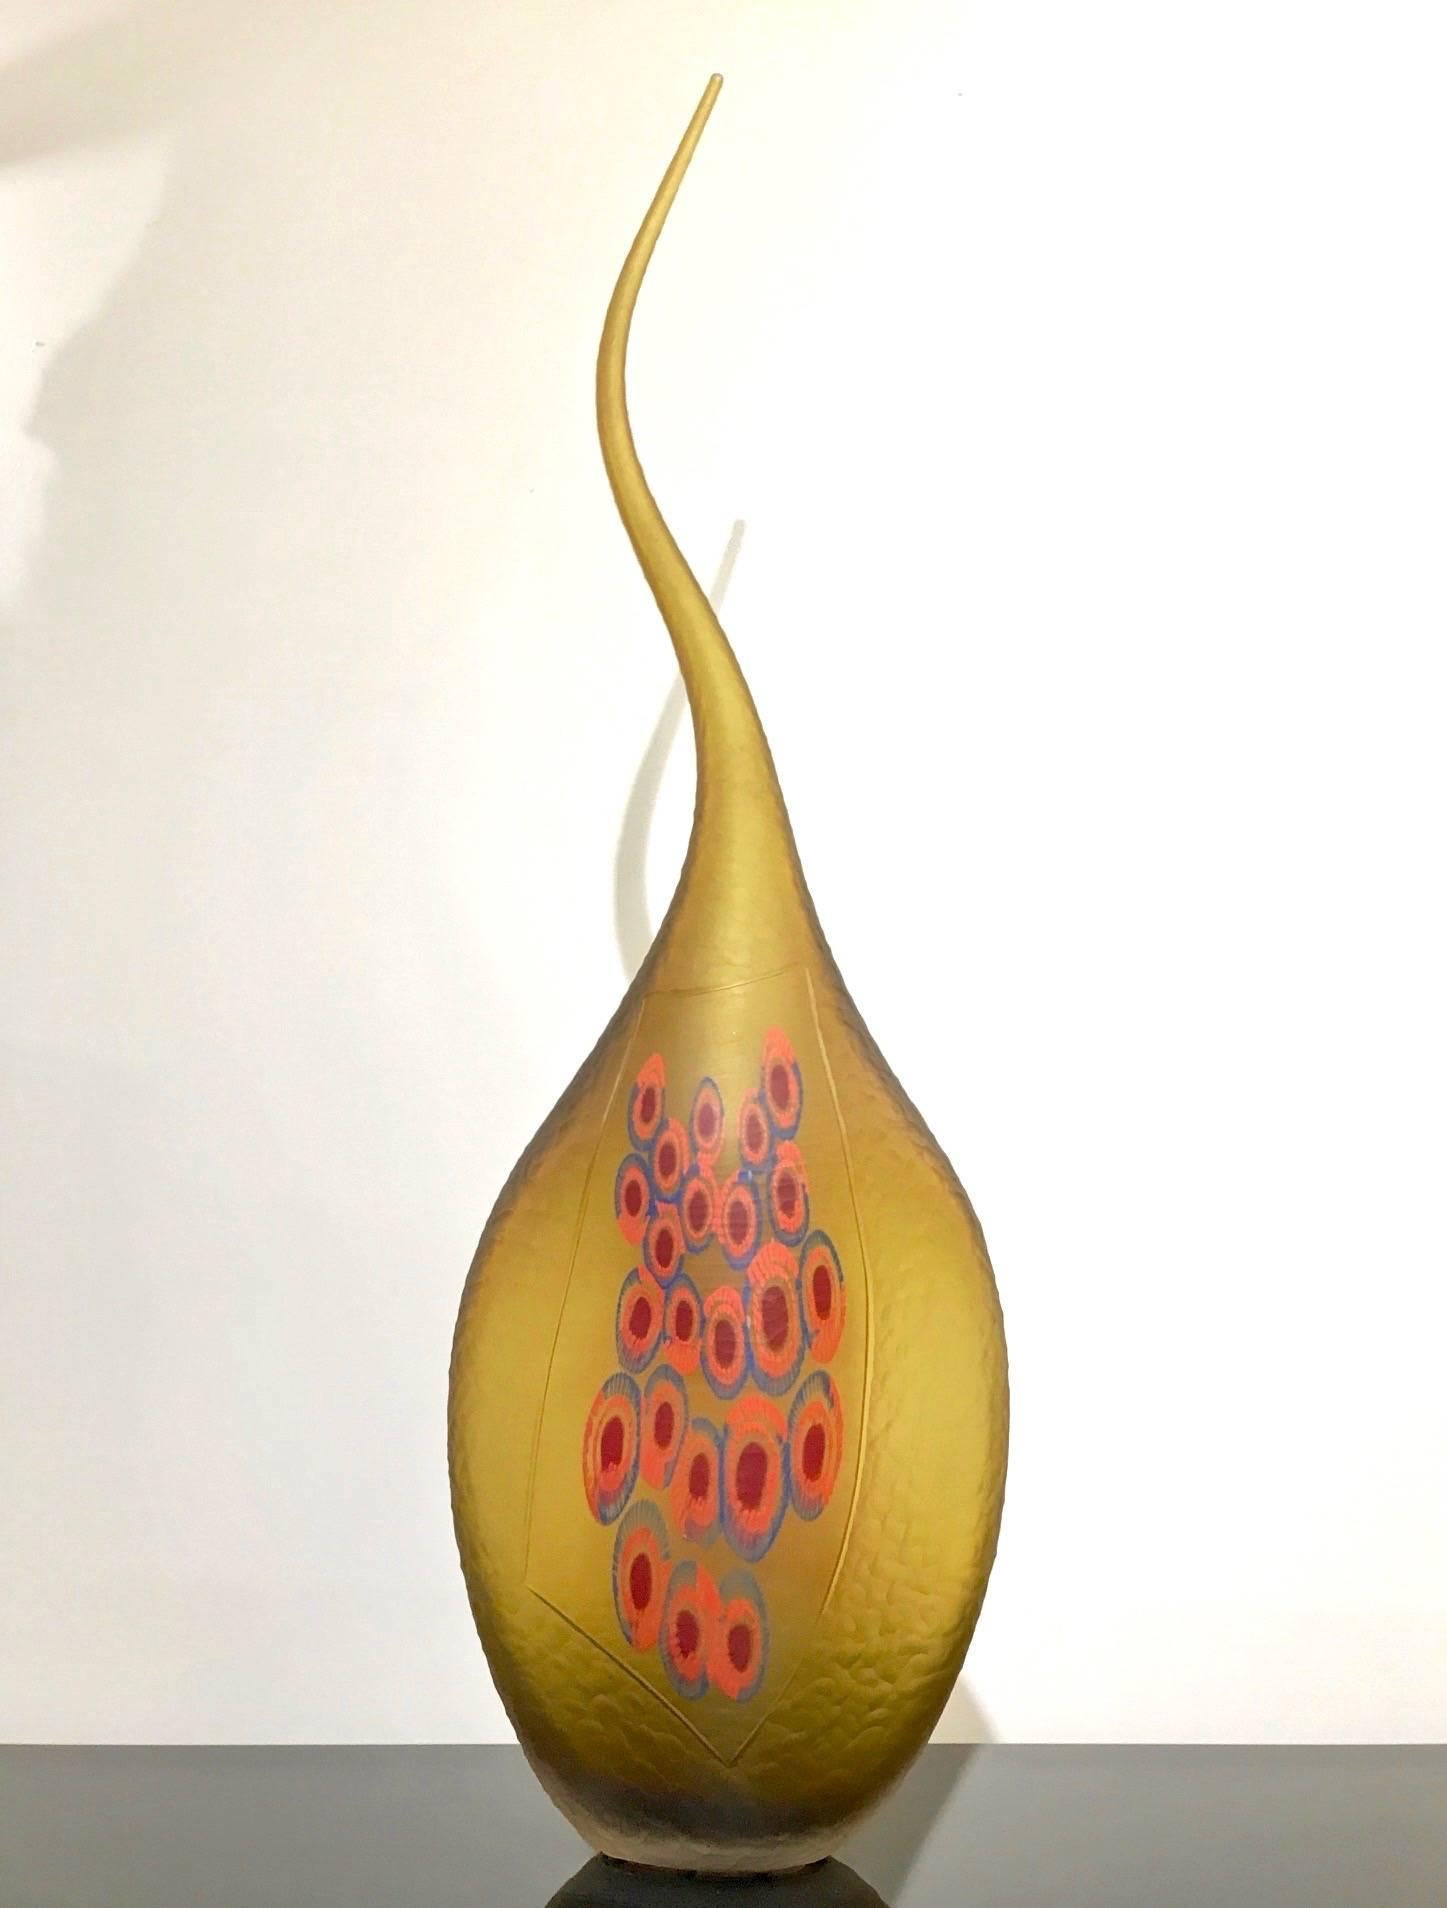 Monumental Italian art glass vase, one of a kind Work of Art signed by Davide Dona, in blown Murano glass with a rare yellow amber color, skillfully overlaid in crystal clear glass highlighted with red and blue murrine expanded like a modern